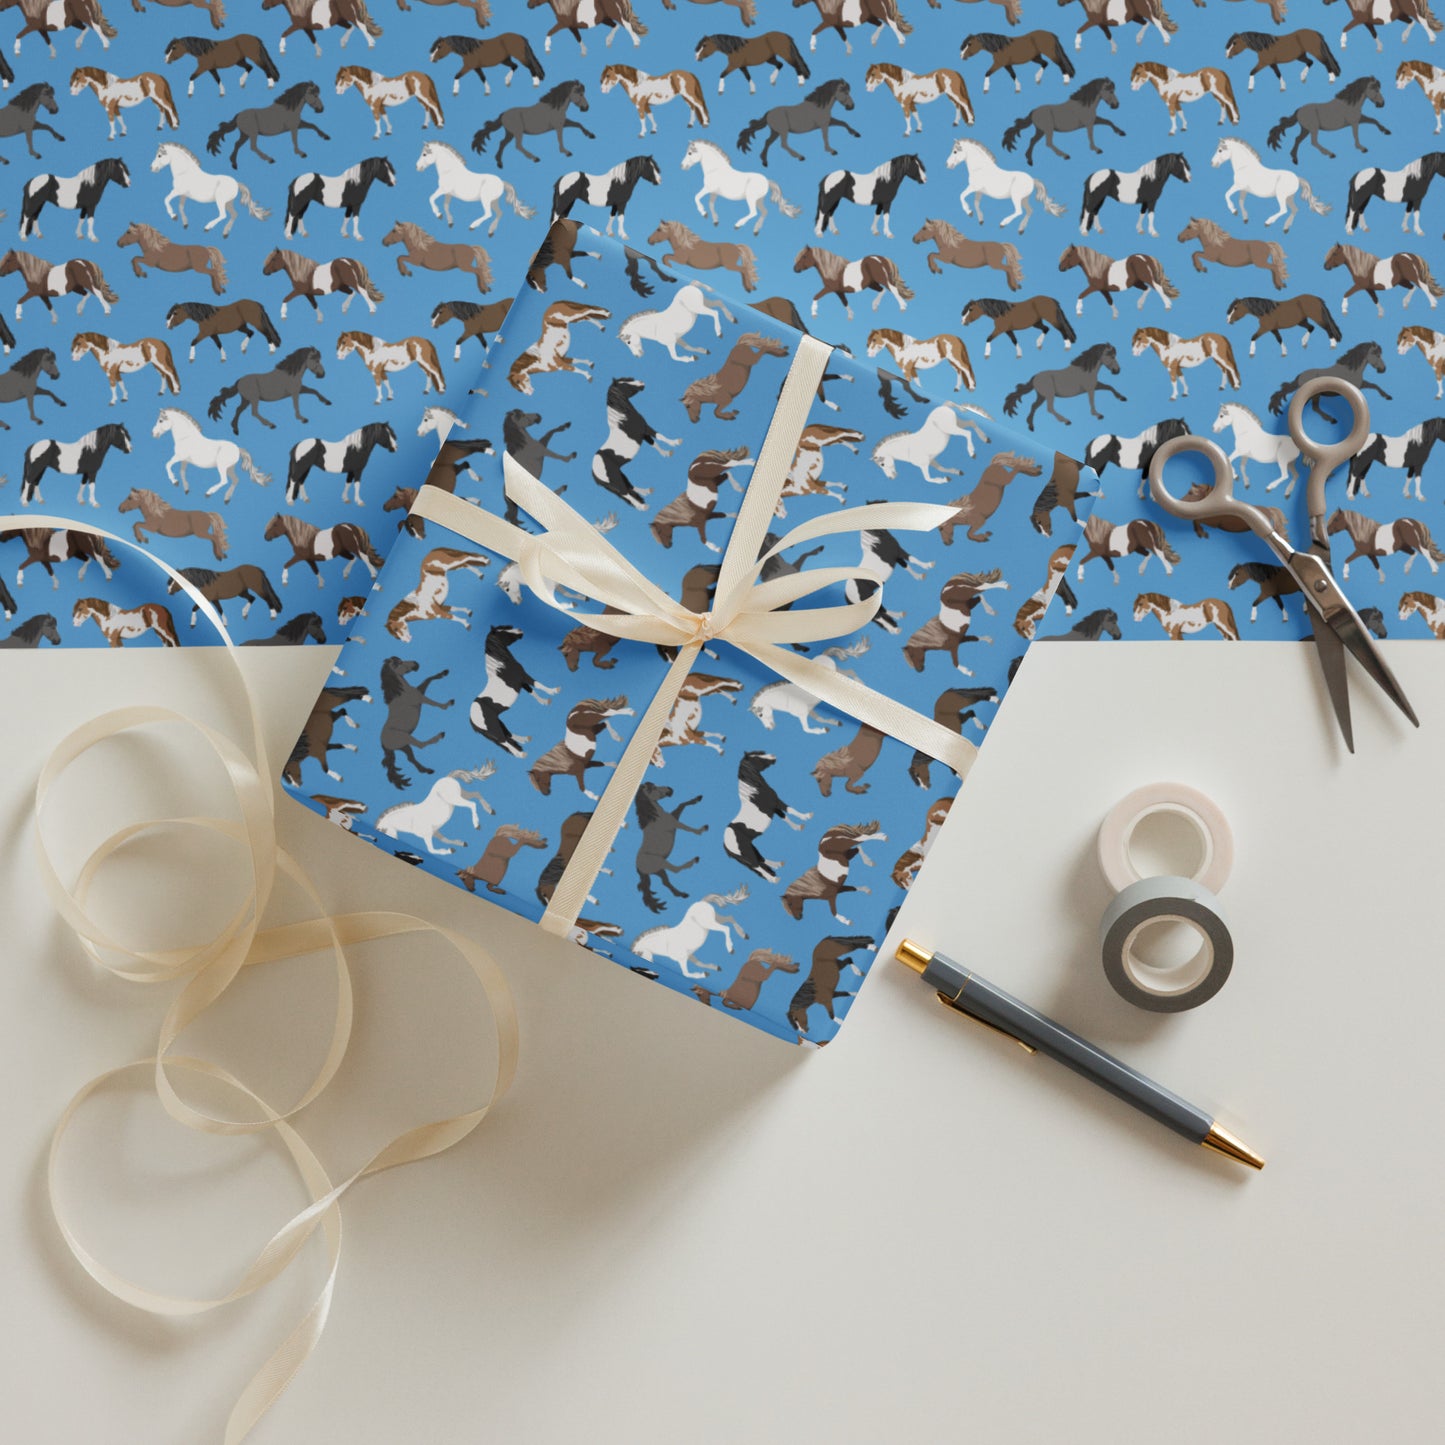 Ponies on Blue Wrapping Paper Sheets